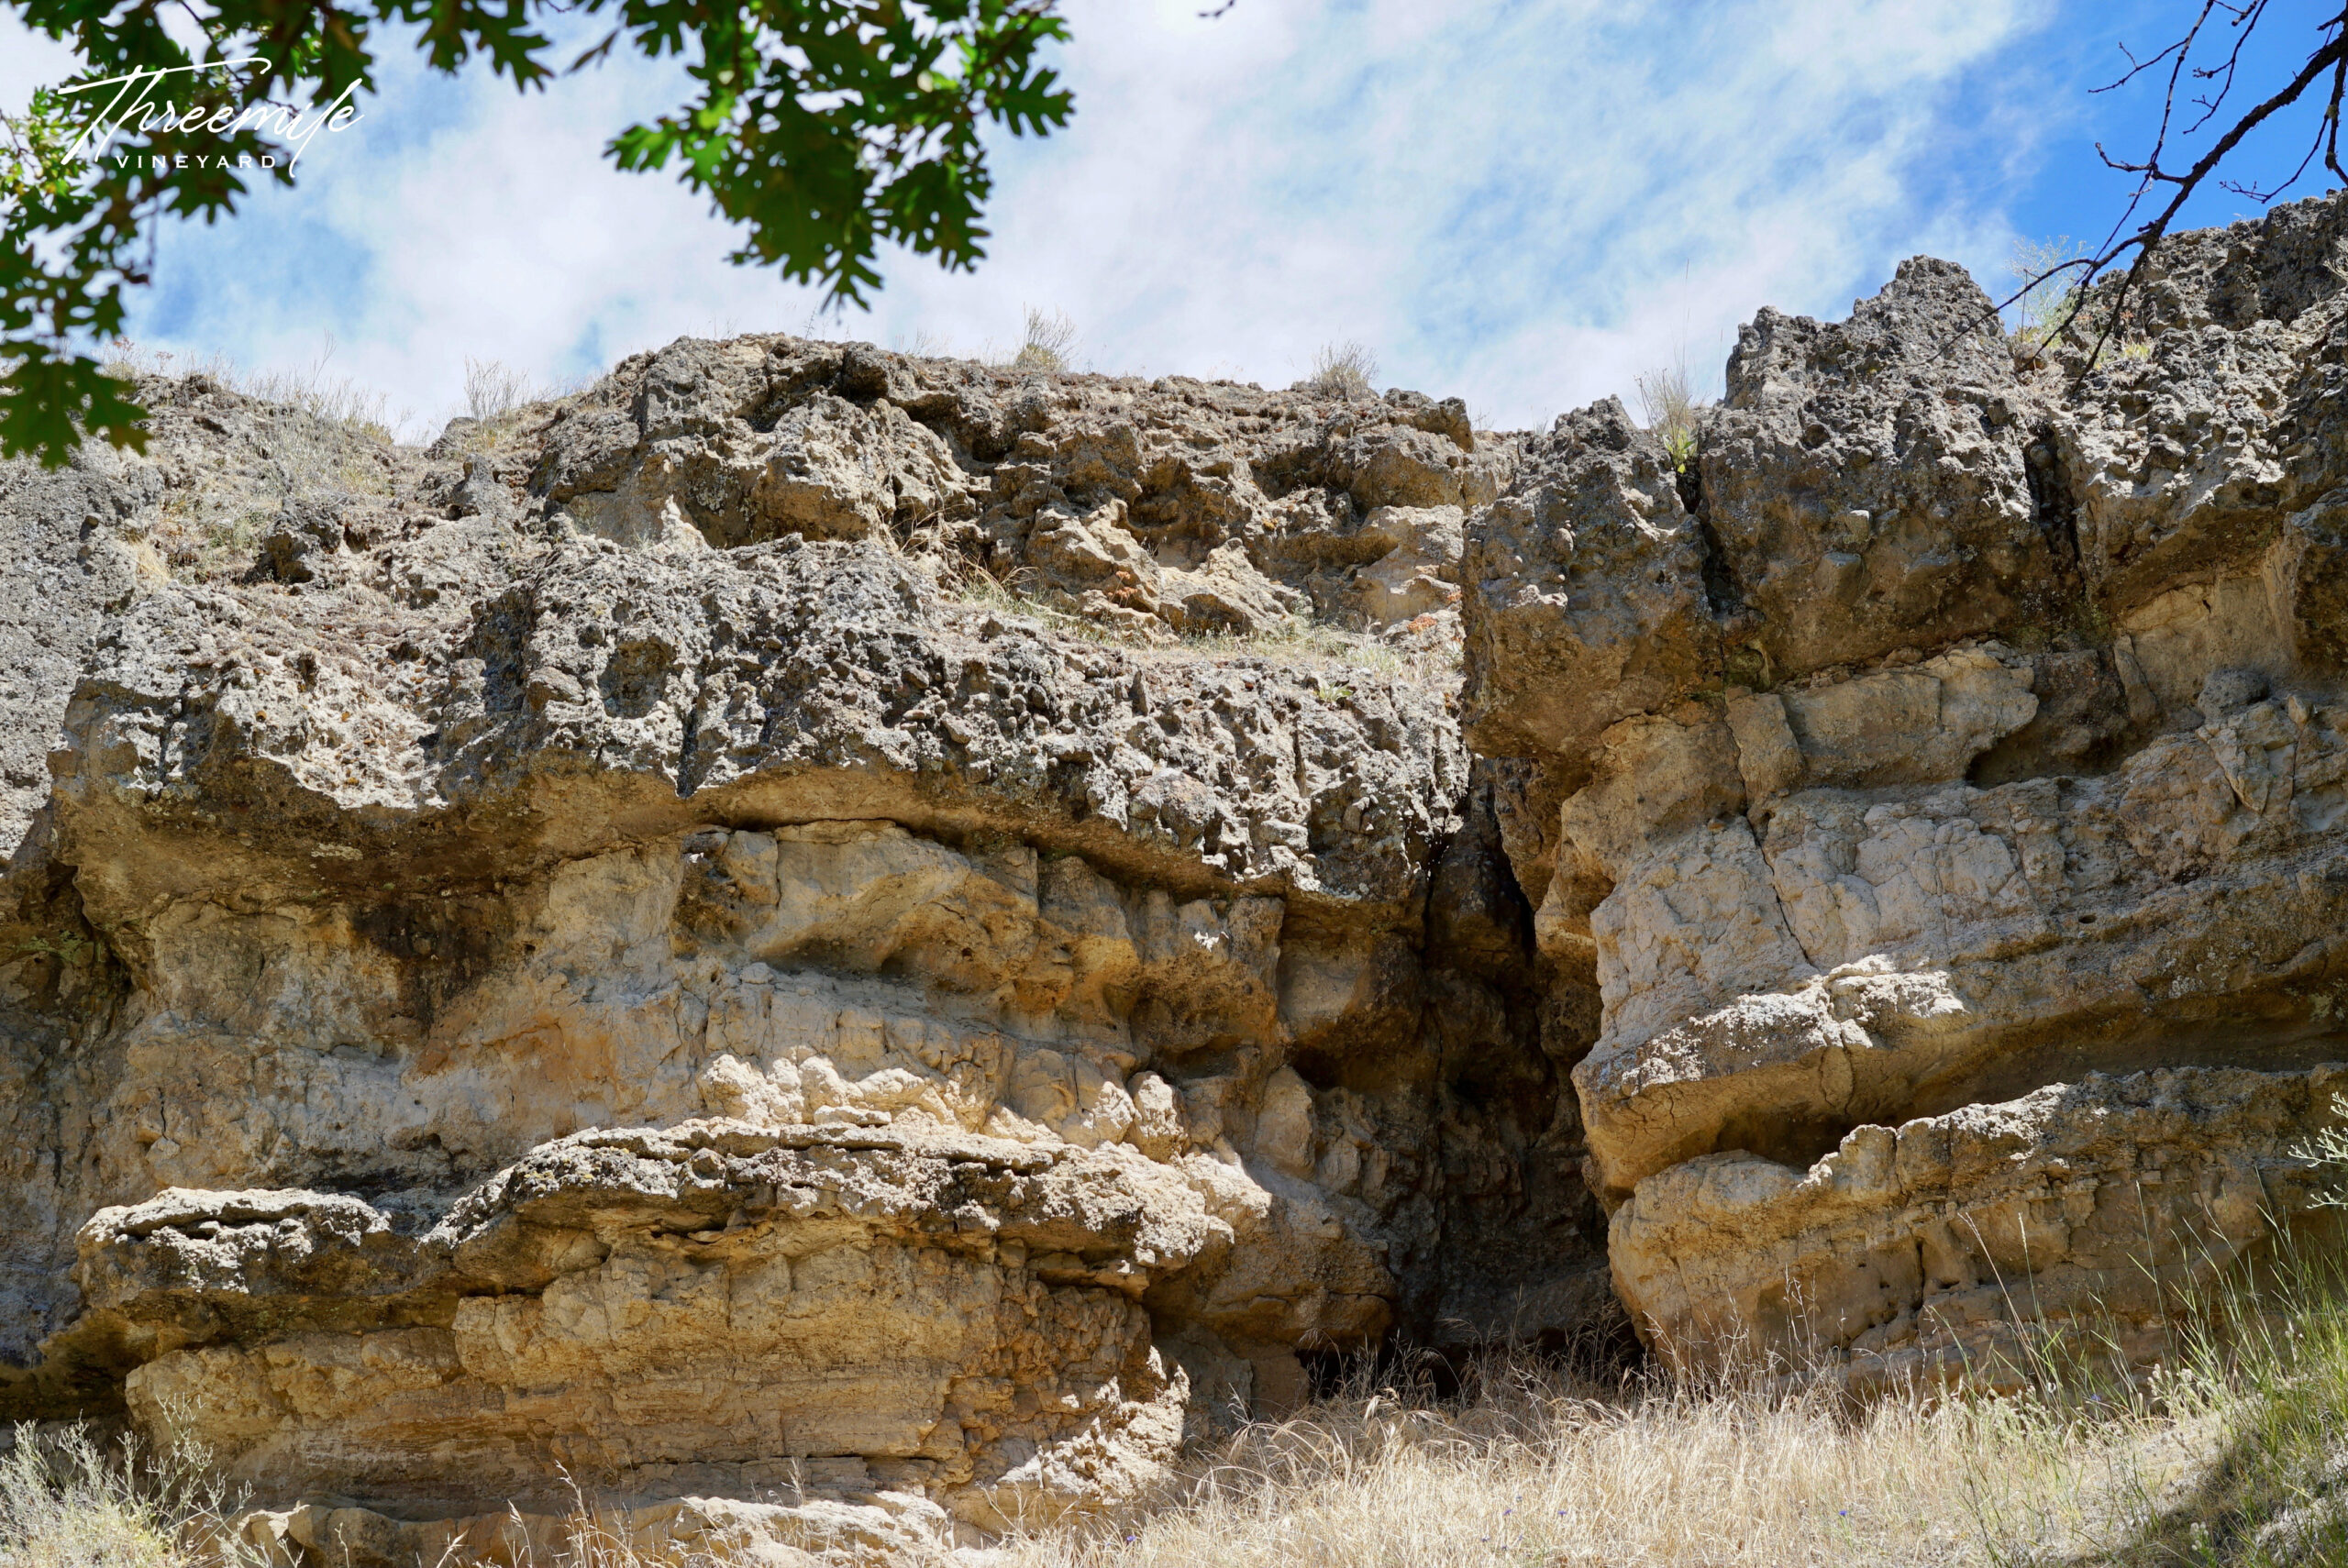 Layered bedrock in the the Dalles at Threemile Vineyard